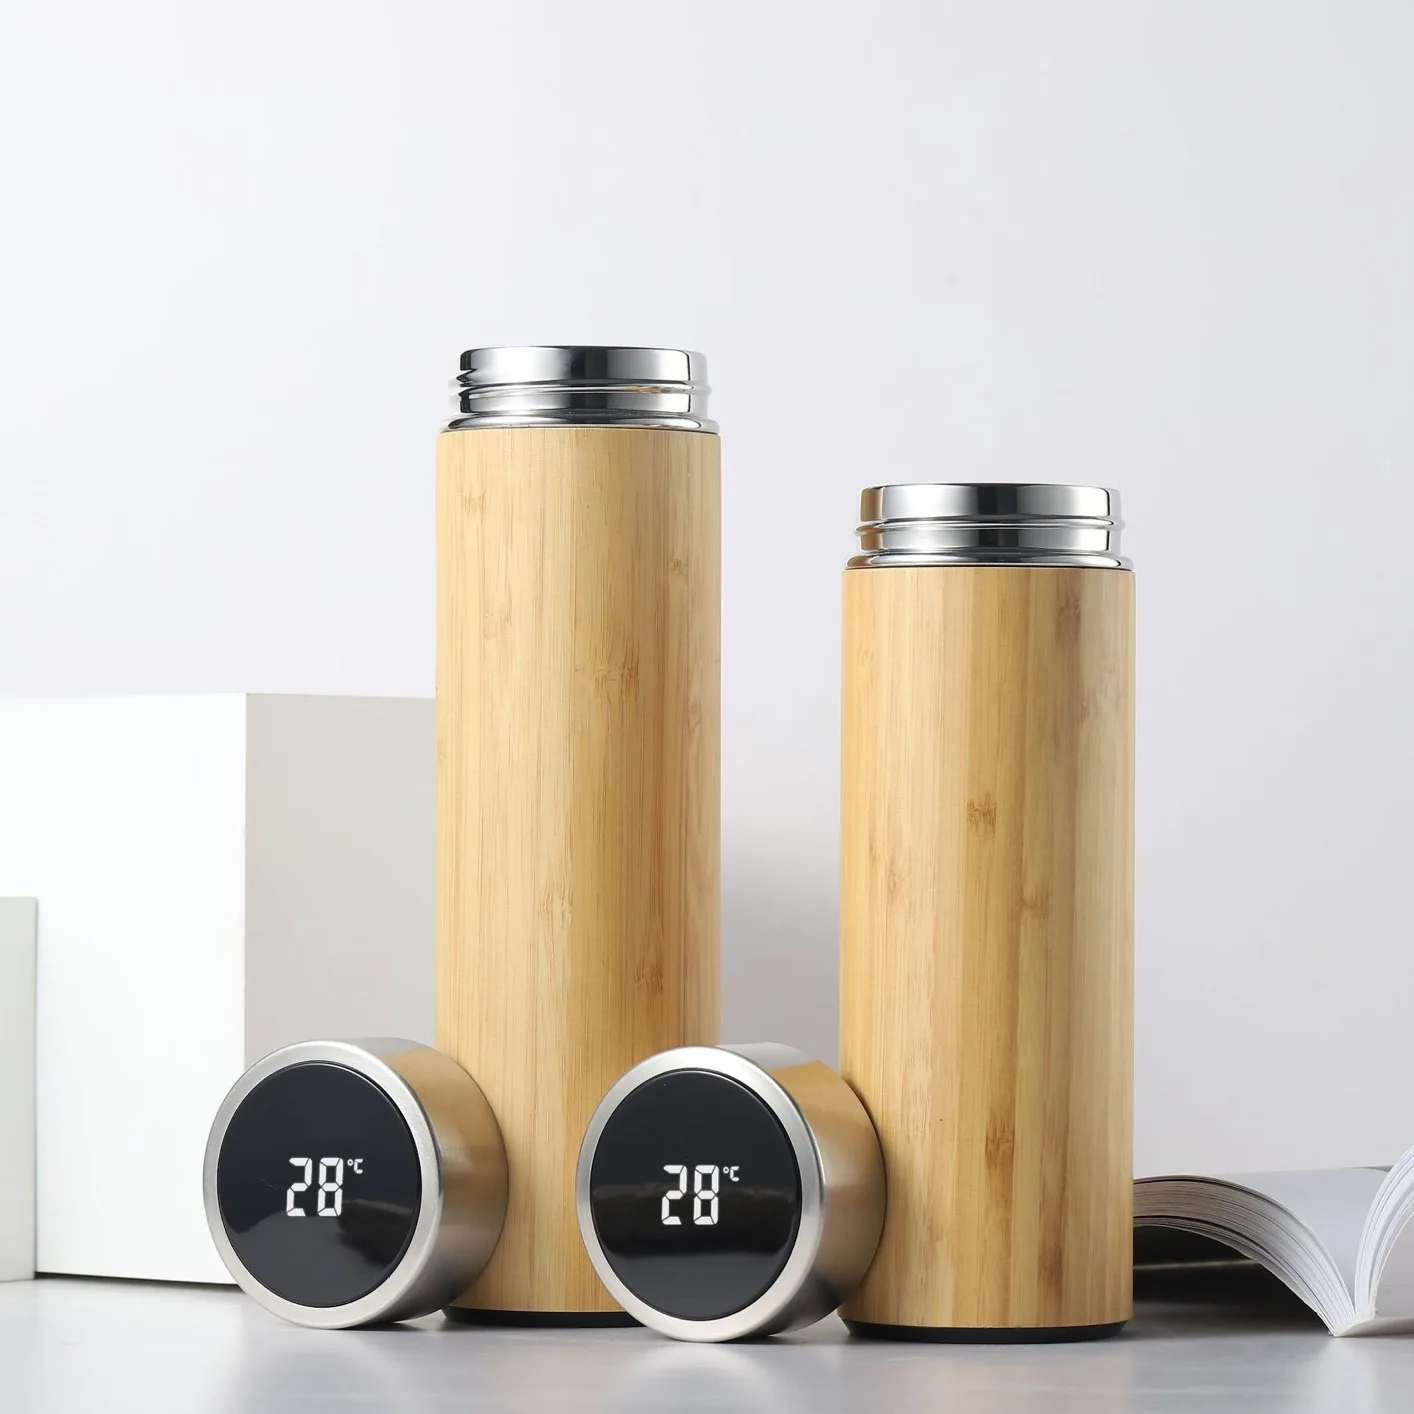 

Smart Temperature Display Eco-Friendly Natural Bamboo Tumbler Vacuum Insulated Thermal Flask Travel Tea Cup Smart Bamboo Cup, Bamboo color